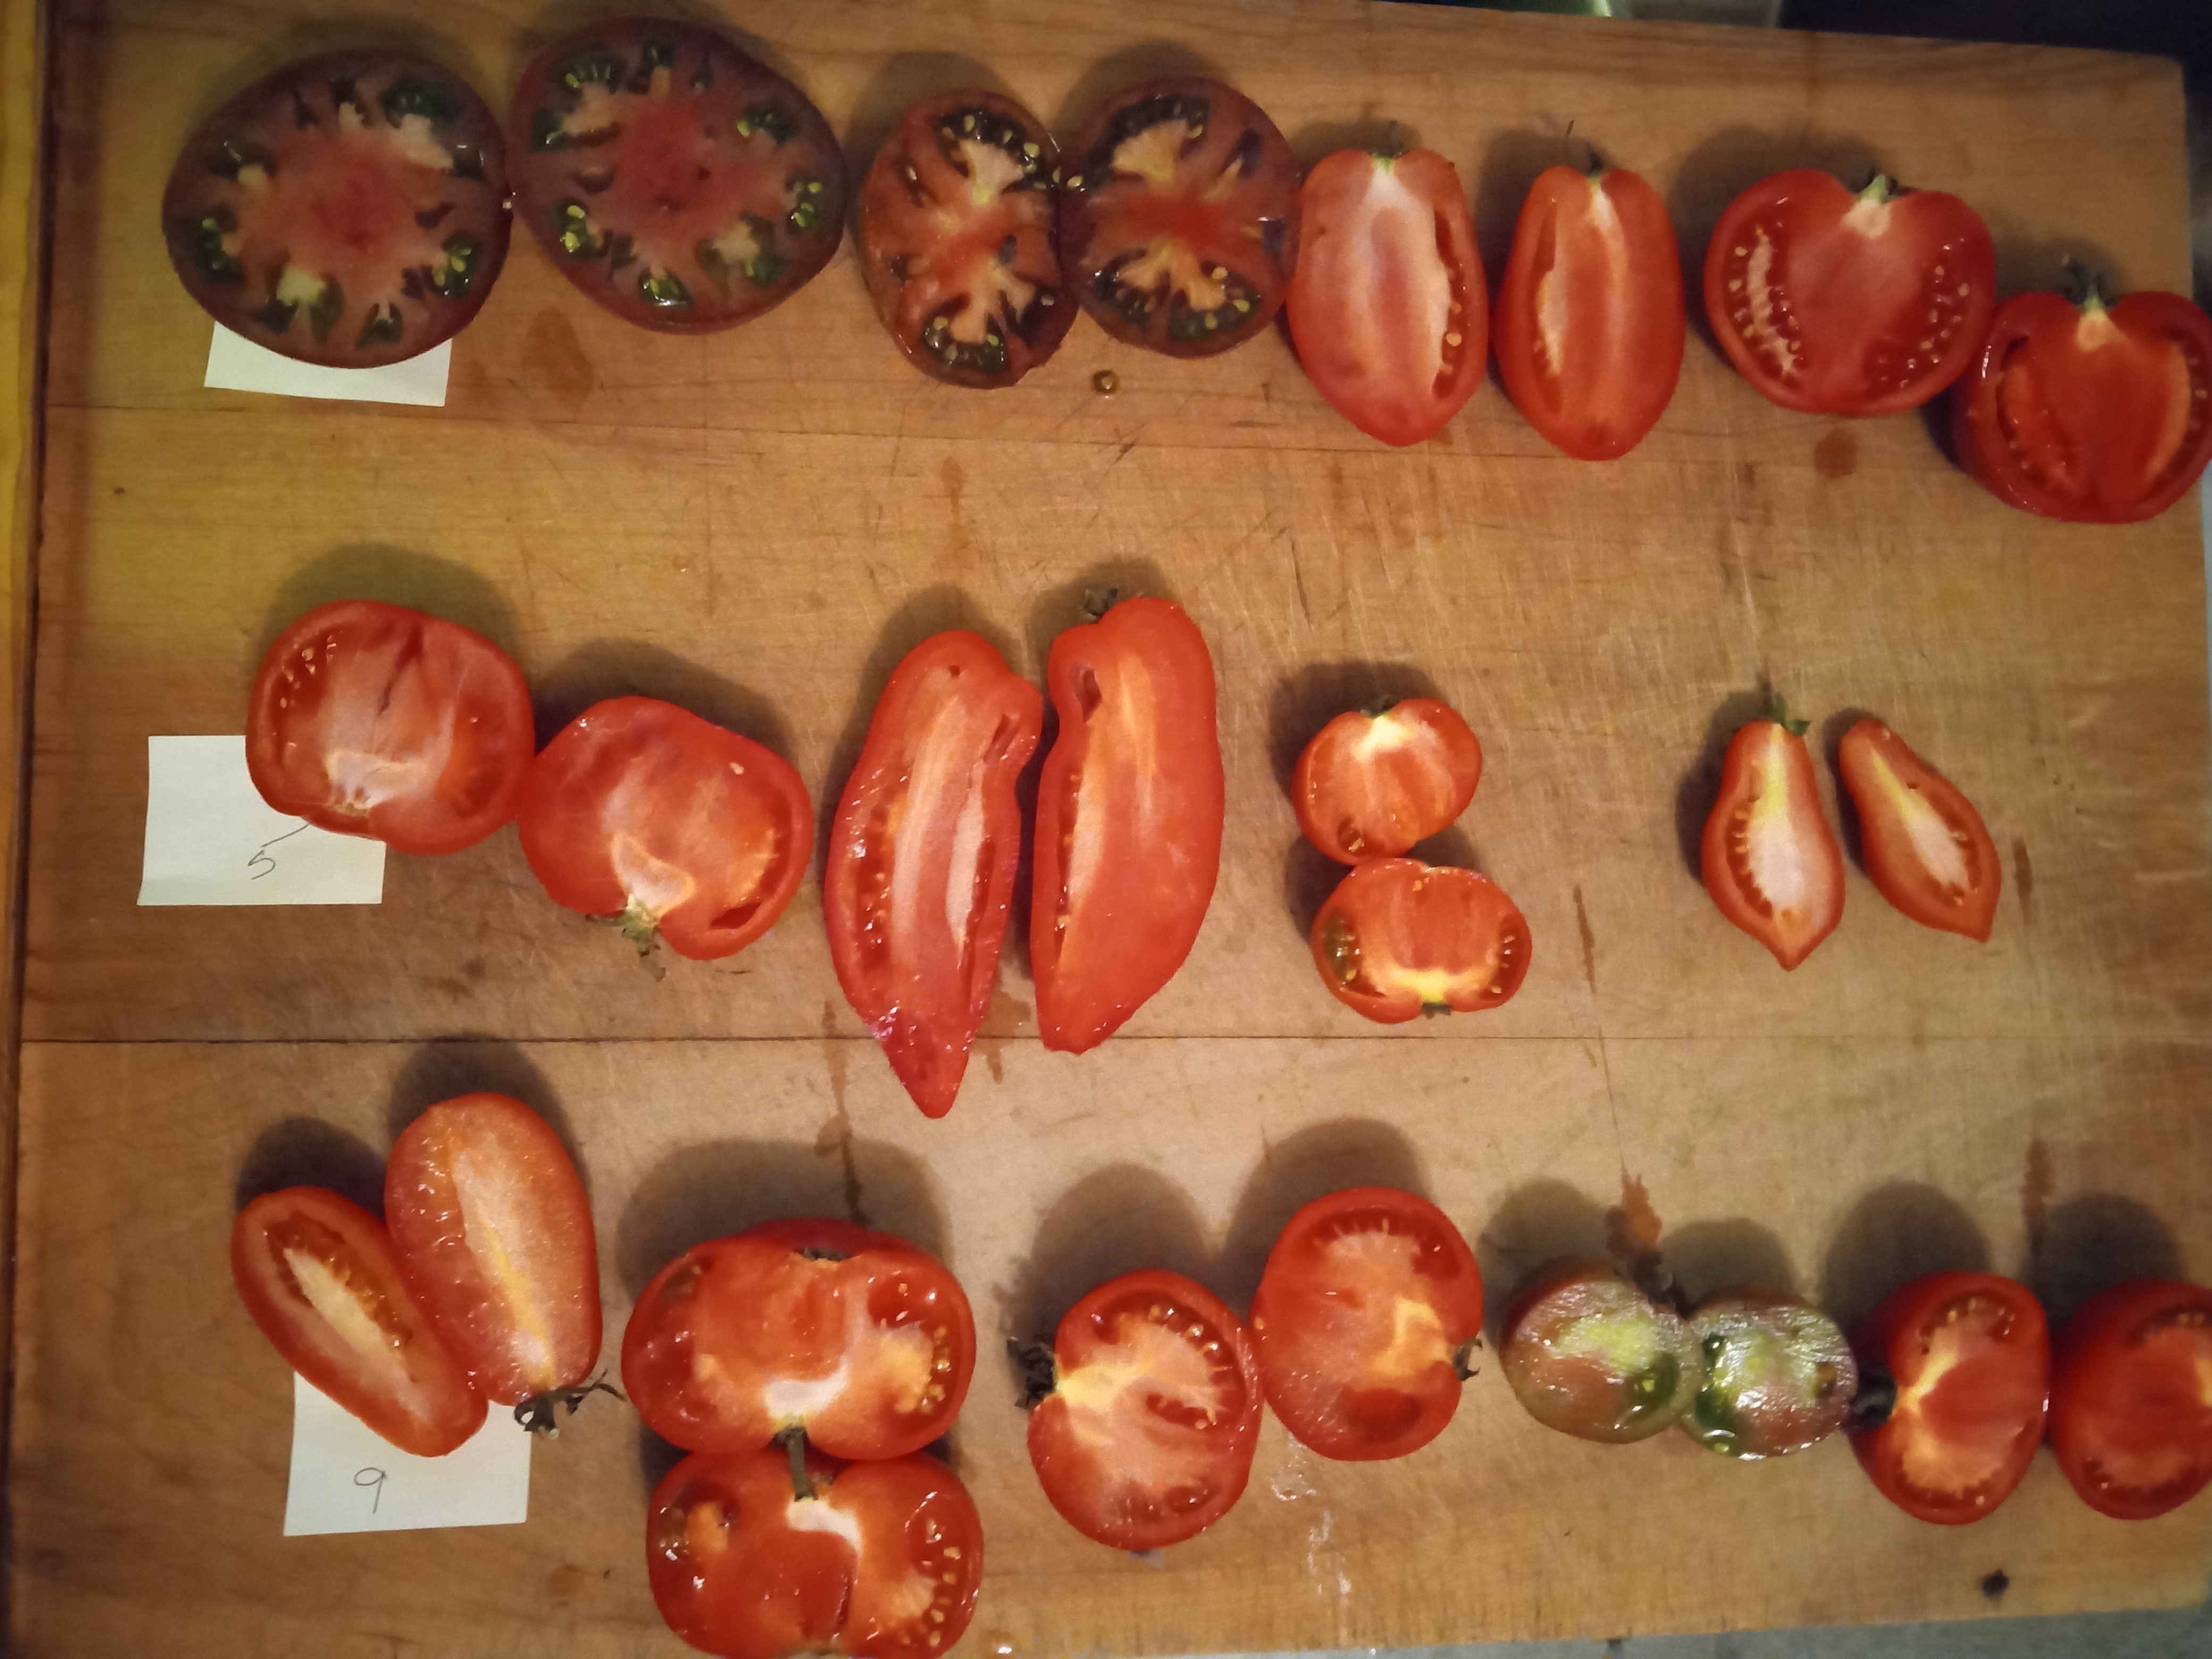 Tomato varieties sampled for pH - sliced view - October 23 23